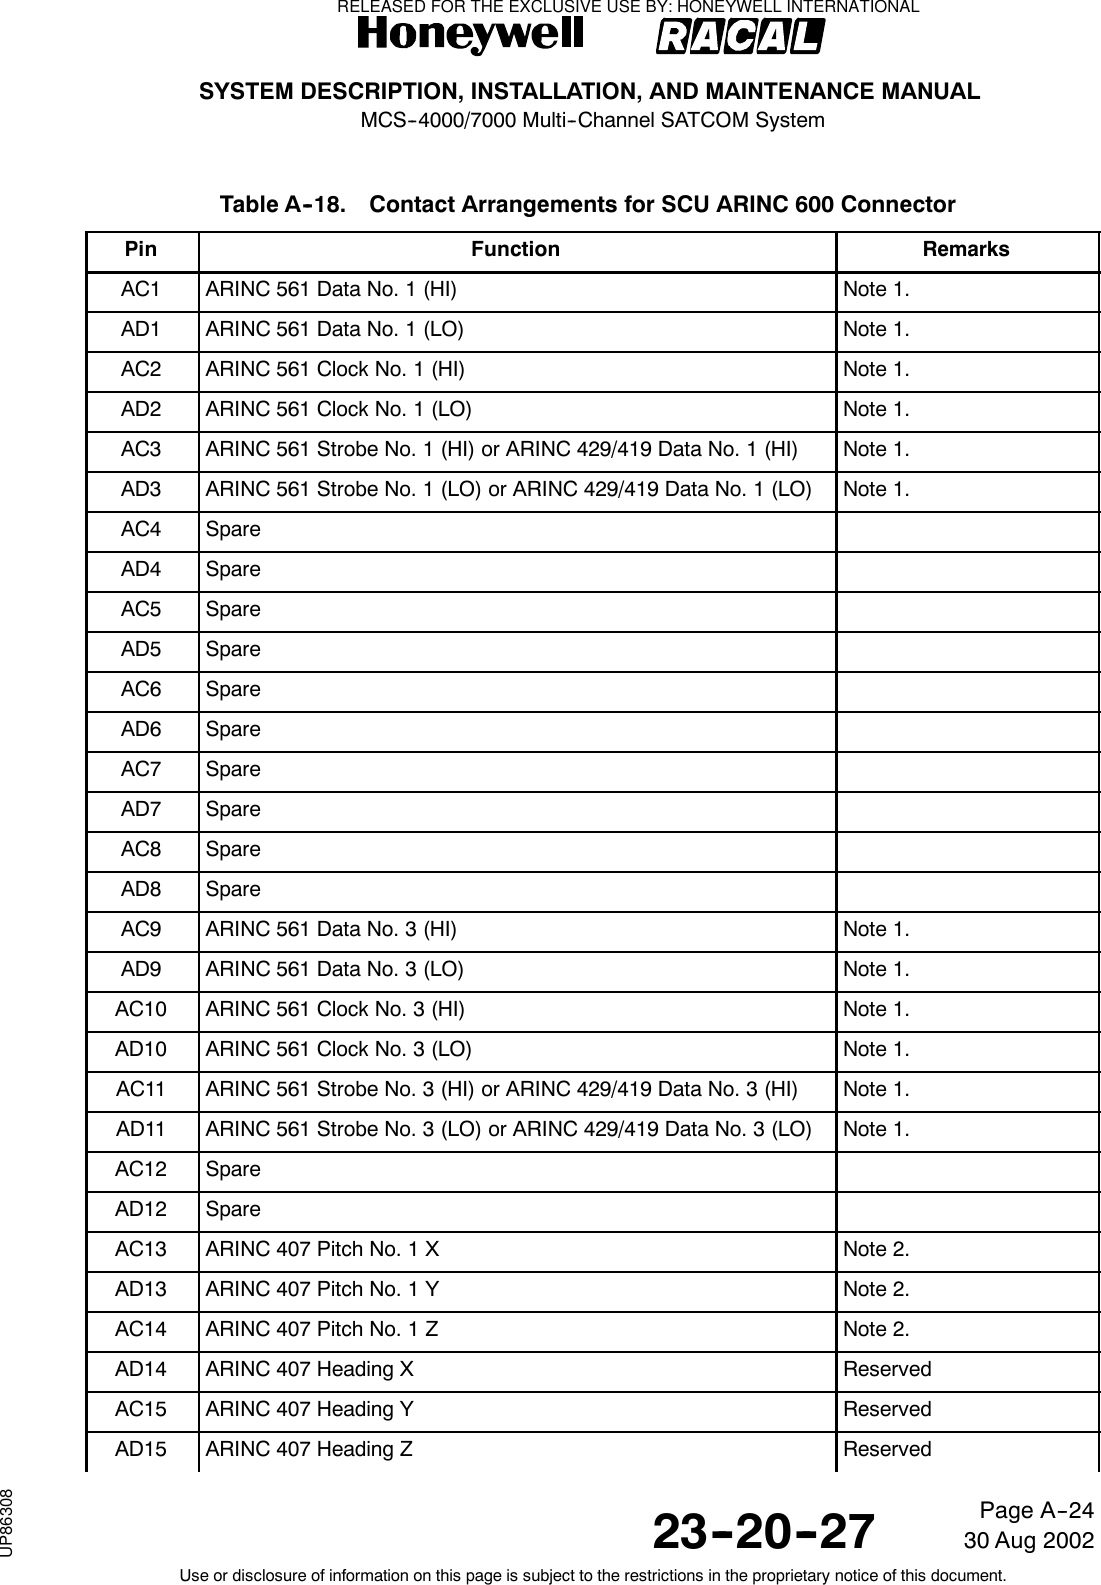 SYSTEM DESCRIPTION, INSTALLATION, AND MAINTENANCE MANUALMCS--4000/7000 Multi--Channel SATCOM System23--20--2730 Aug 2002Use or disclosure of information on this page is subject to the restrictions in the proprietary notice of this document.Page A--24Table A--18. Contact Arrangements for SCU ARINC 600 ConnectorPin Function RemarksAC1 ARINC 561 Data No. 1 (HI) Note 1.AD1 ARINC 561 Data No. 1 (LO) Note 1.AC2 ARINC 561 Clock No. 1 (HI) Note 1.AD2 ARINC 561 Clock No. 1 (LO) Note 1.AC3 ARINC 561 Strobe No. 1 (HI) or ARINC 429/419 Data No. 1 (HI) Note 1.AD3 ARINC 561 Strobe No. 1 (LO) or ARINC 429/419 Data No. 1 (LO) Note 1.AC4 SpareAD4 SpareAC5 SpareAD5 SpareAC6 SpareAD6 SpareAC7 SpareAD7 SpareAC8 SpareAD8 SpareAC9 ARINC 561 Data No. 3 (HI) Note 1.AD9 ARINC 561 Data No. 3 (LO) Note 1.AC10 ARINC 561 Clock No. 3 (HI) Note 1.AD10 ARINC 561 Clock No. 3 (LO) Note 1.AC11 ARINC 561 Strobe No. 3 (HI) or ARINC 429/419 Data No. 3 (HI) Note 1.AD11 ARINC 561 Strobe No. 3 (LO) or ARINC 429/419 Data No. 3 (LO) Note 1.AC12 SpareAD12 SpareAC13 ARINC 407 Pitch No. 1 X Note 2.AD13 ARINC 407 Pitch No. 1 Y Note 2.AC14 ARINC 407 Pitch No. 1 Z Note 2.AD14 ARINC 407 Heading X ReservedAC15 ARINC 407 Heading Y ReservedAD15 ARINC 407 Heading Z ReservedRELEASED FOR THE EXCLUSIVE USE BY: HONEYWELL INTERNATIONALUP86308